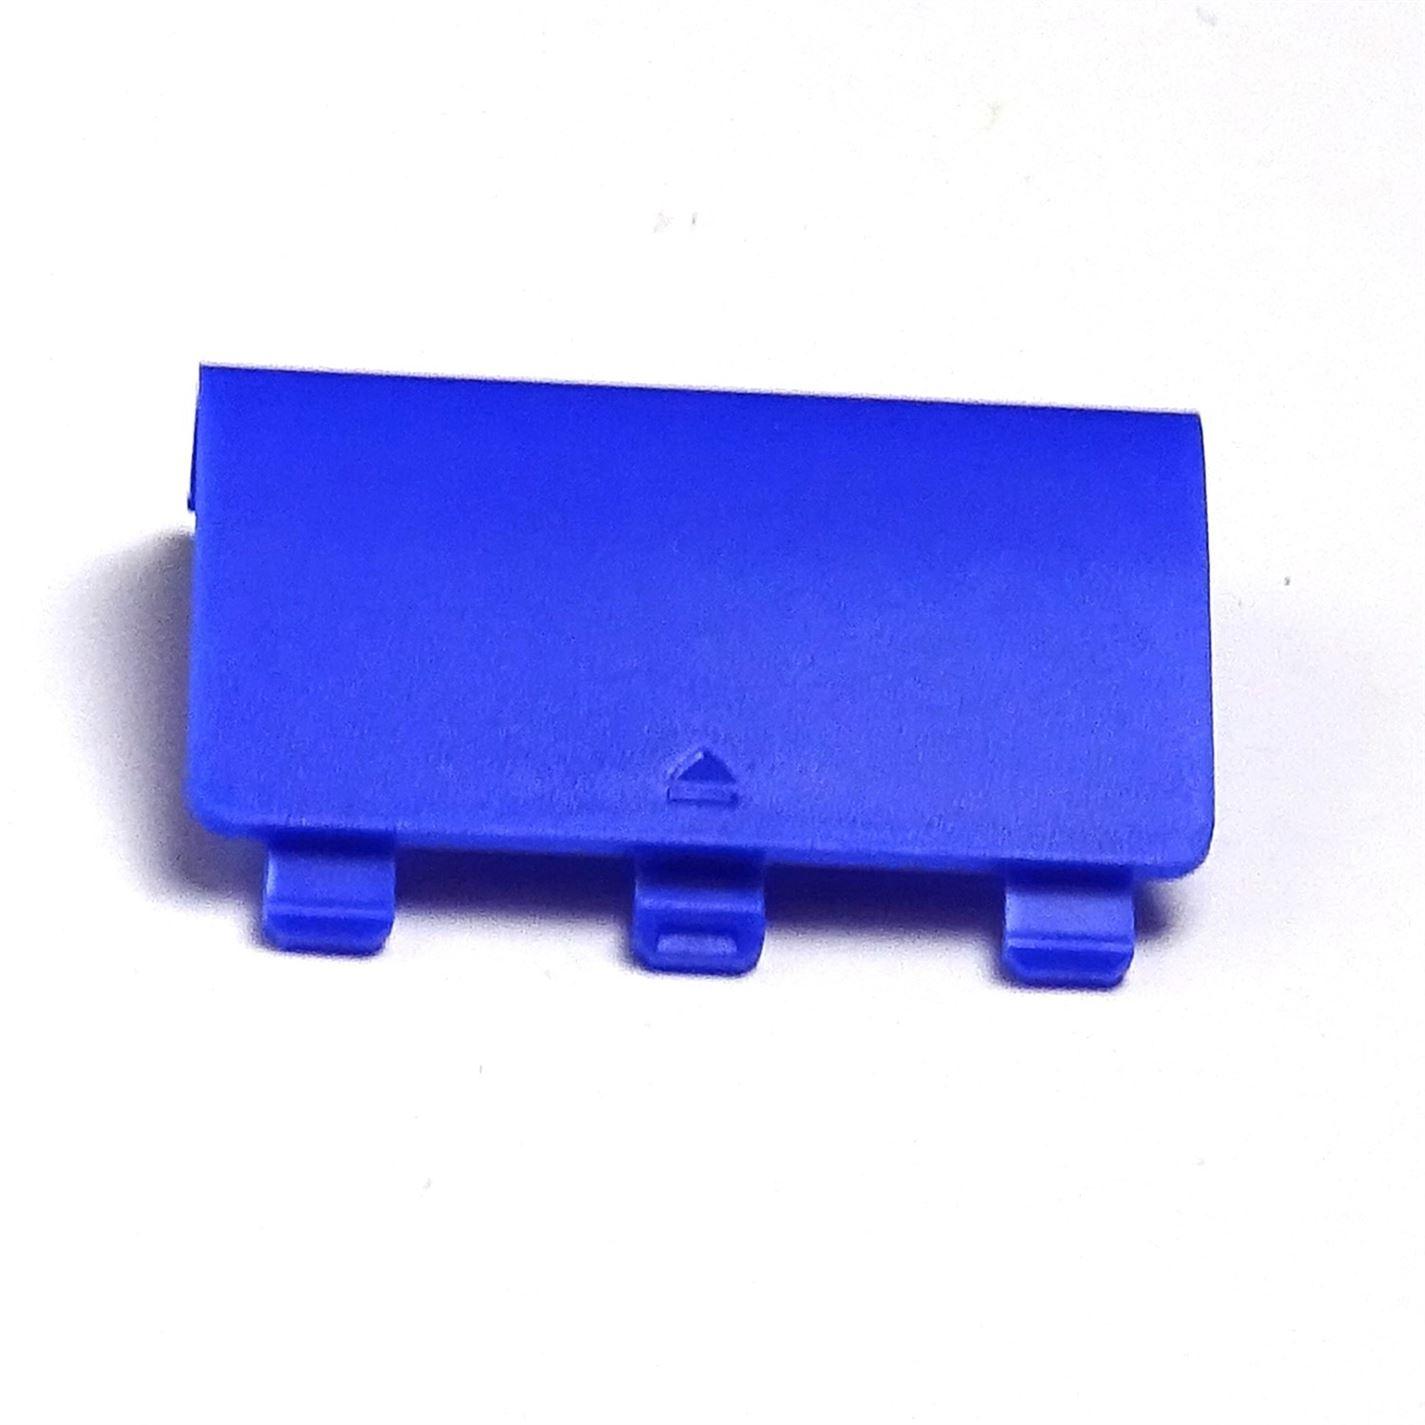 Battery Cover Door Shell Replacement for XBOX One Wireless Controller BLUE - UK Seller